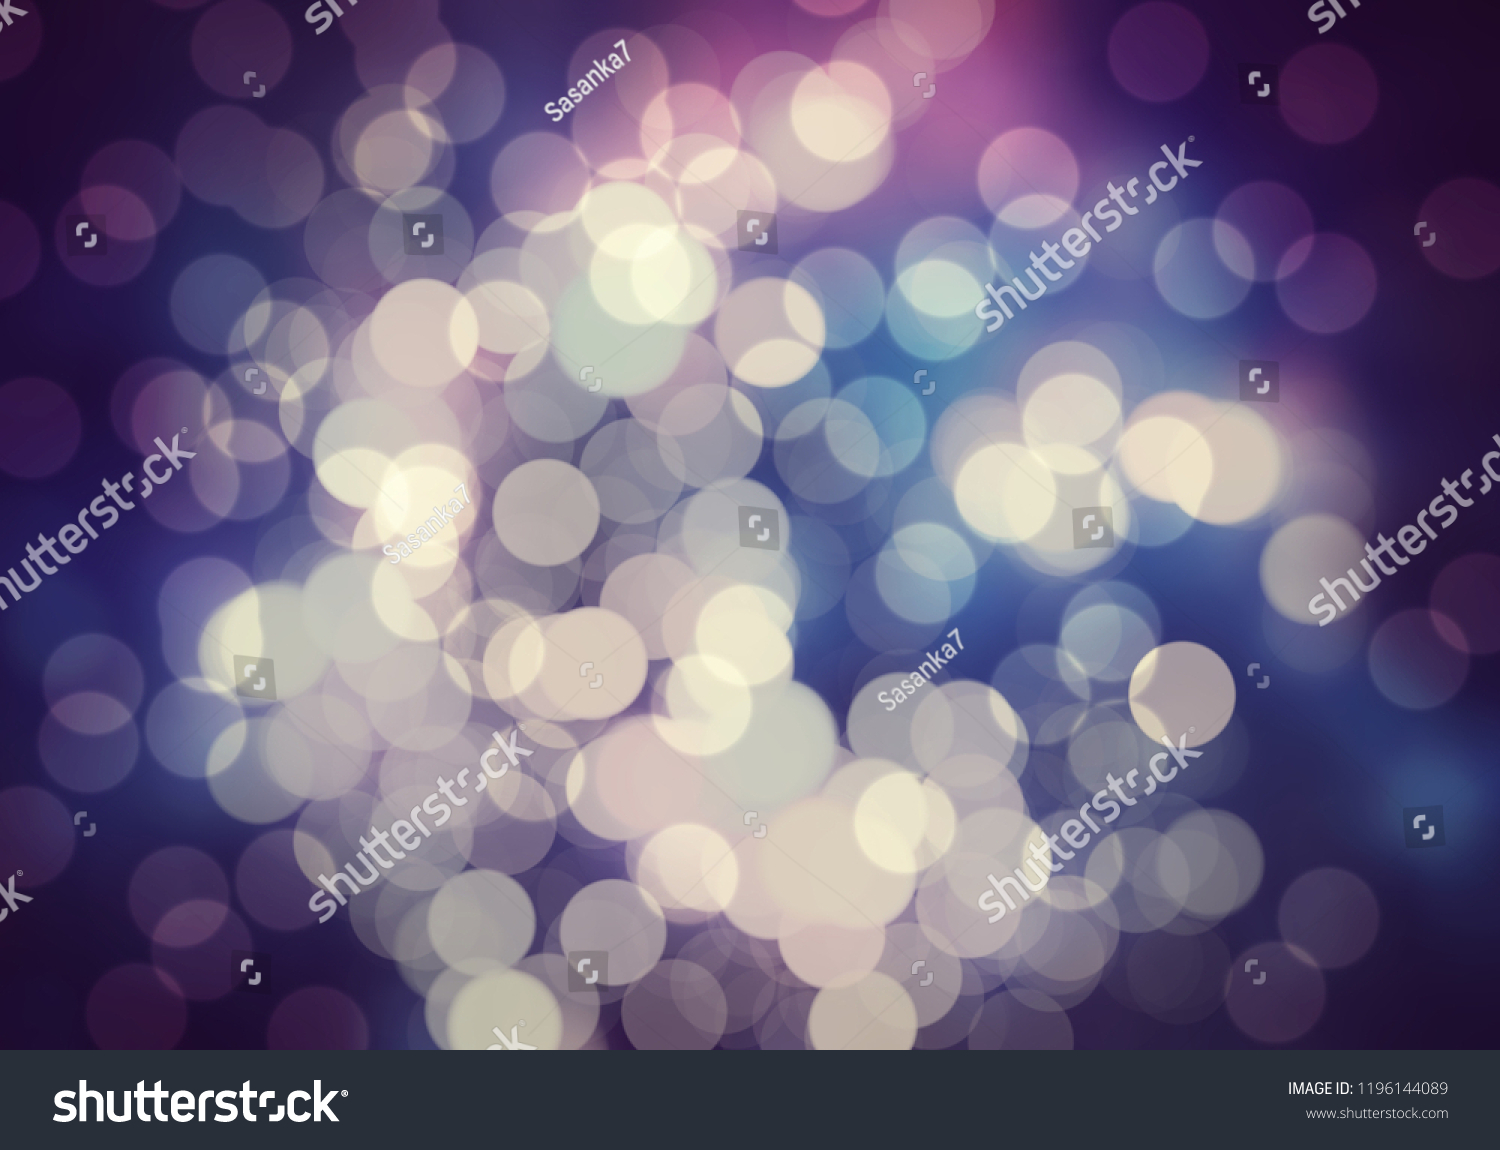 Abstract glowing light bokeh blurry background #1196144089